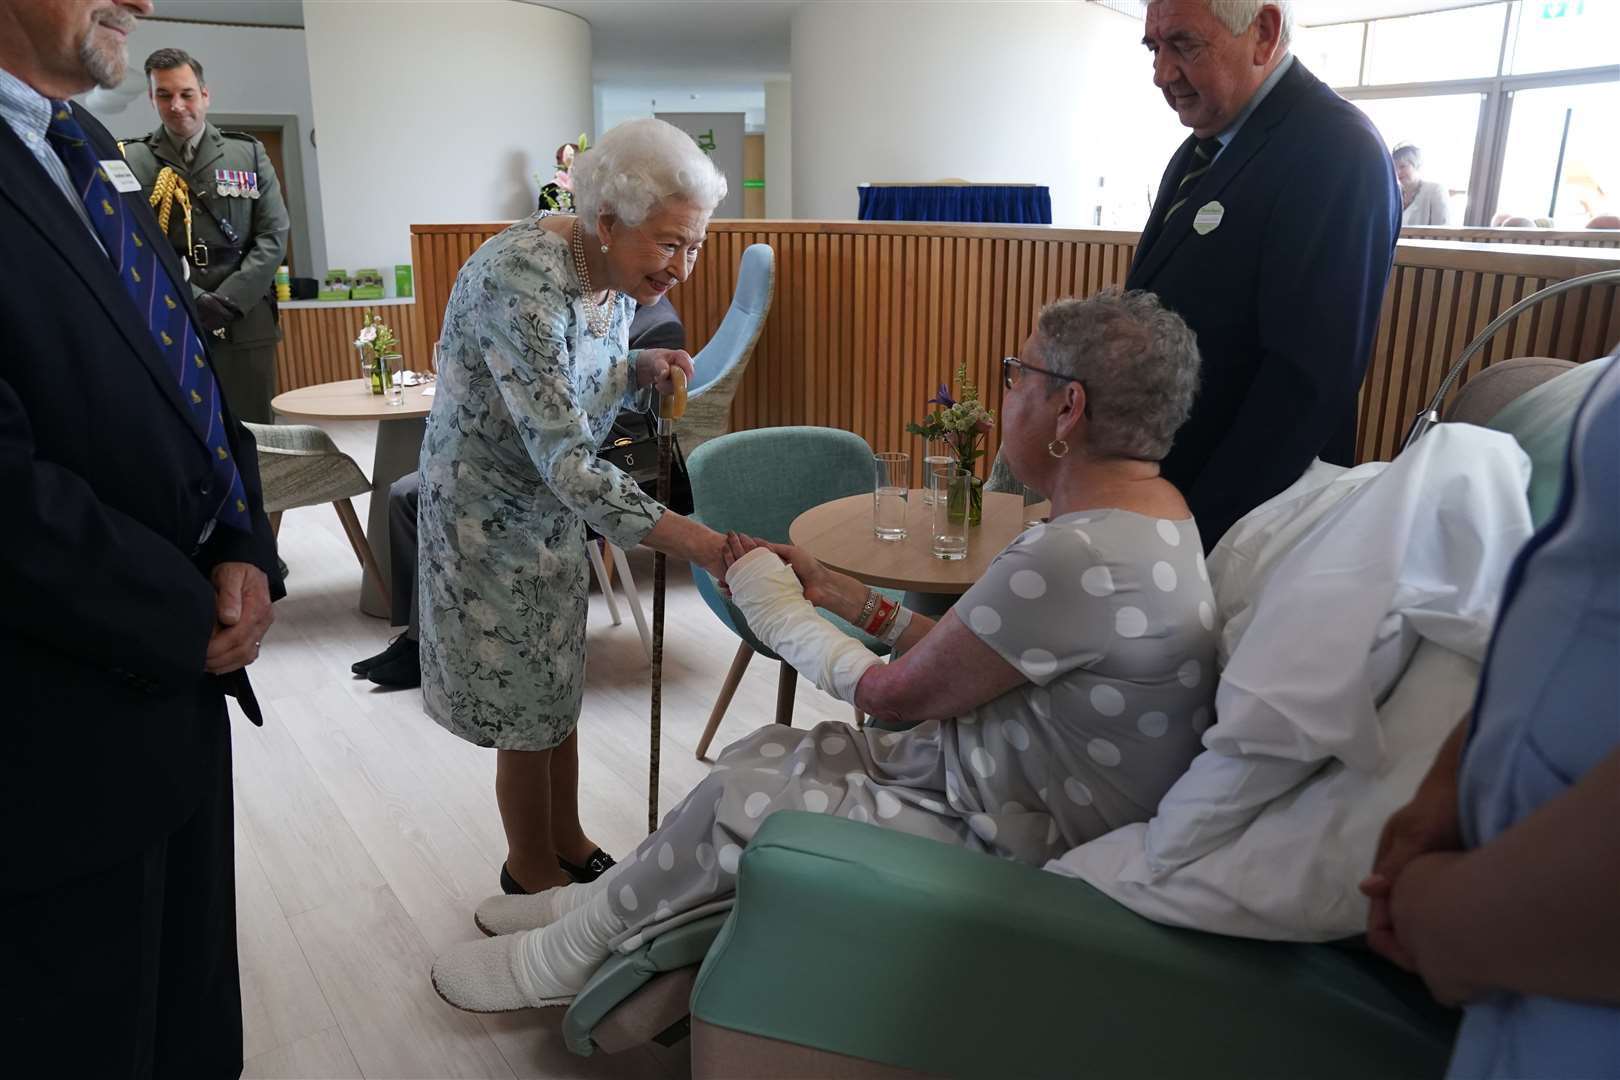 The Queen chatted to cancer patient Pat White, whose husband’s phone rang as they were being introduced (Kirsty O’Connor/PA)